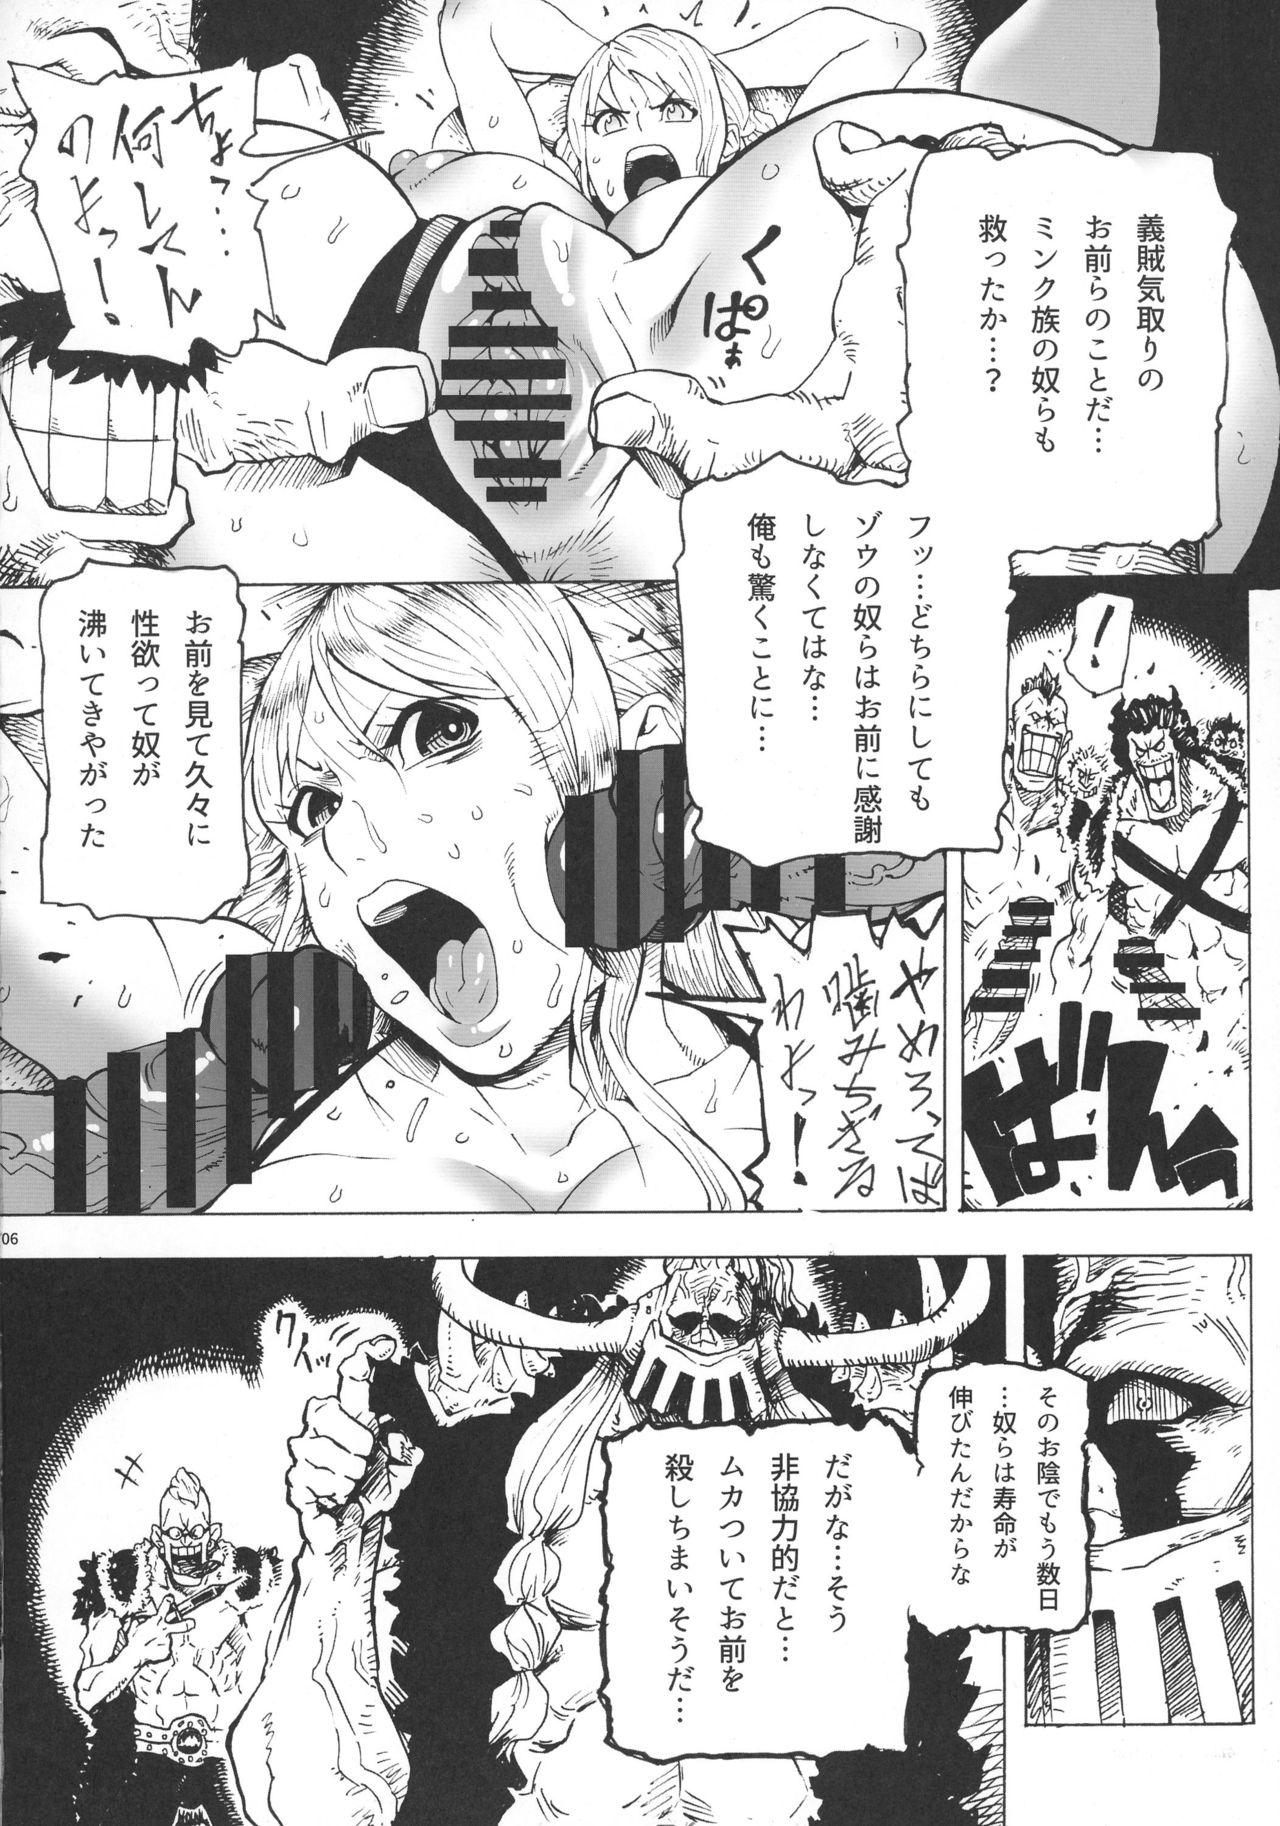 Stripper P.O.M Another Episode "J.A.C.K" - One piece Reverse - Page 8